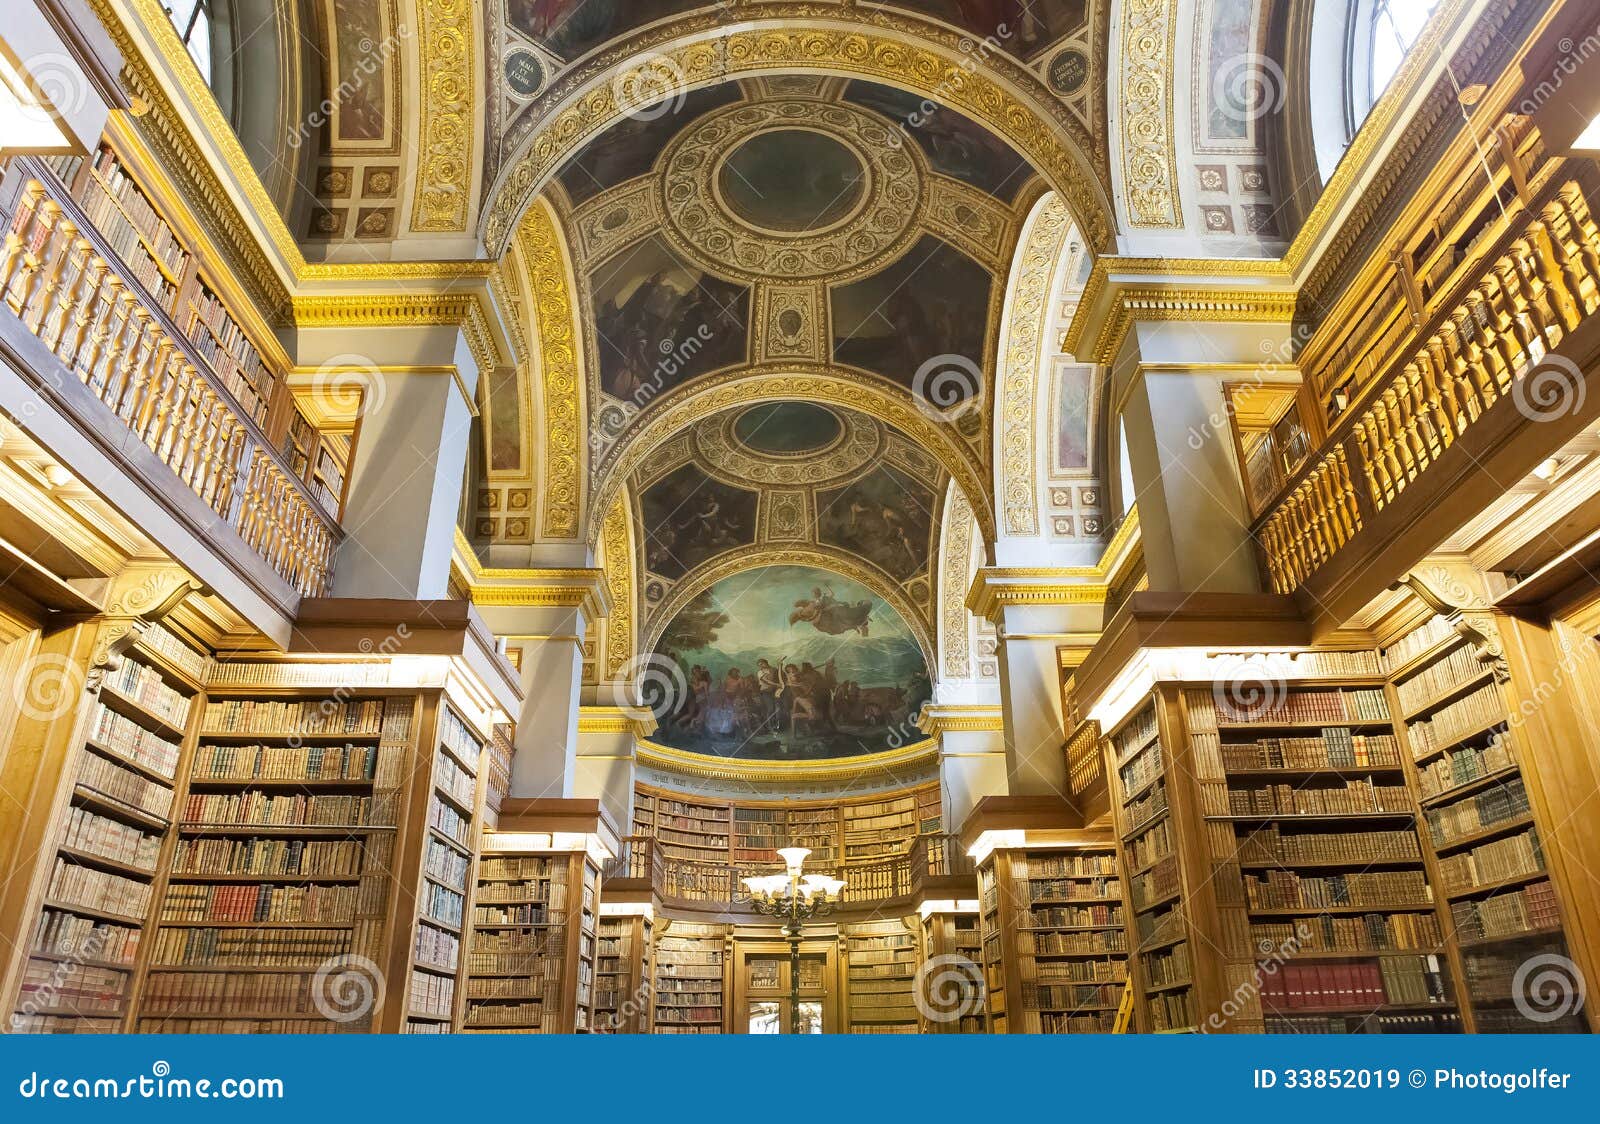 the library at the assemblee nationale, paris, france